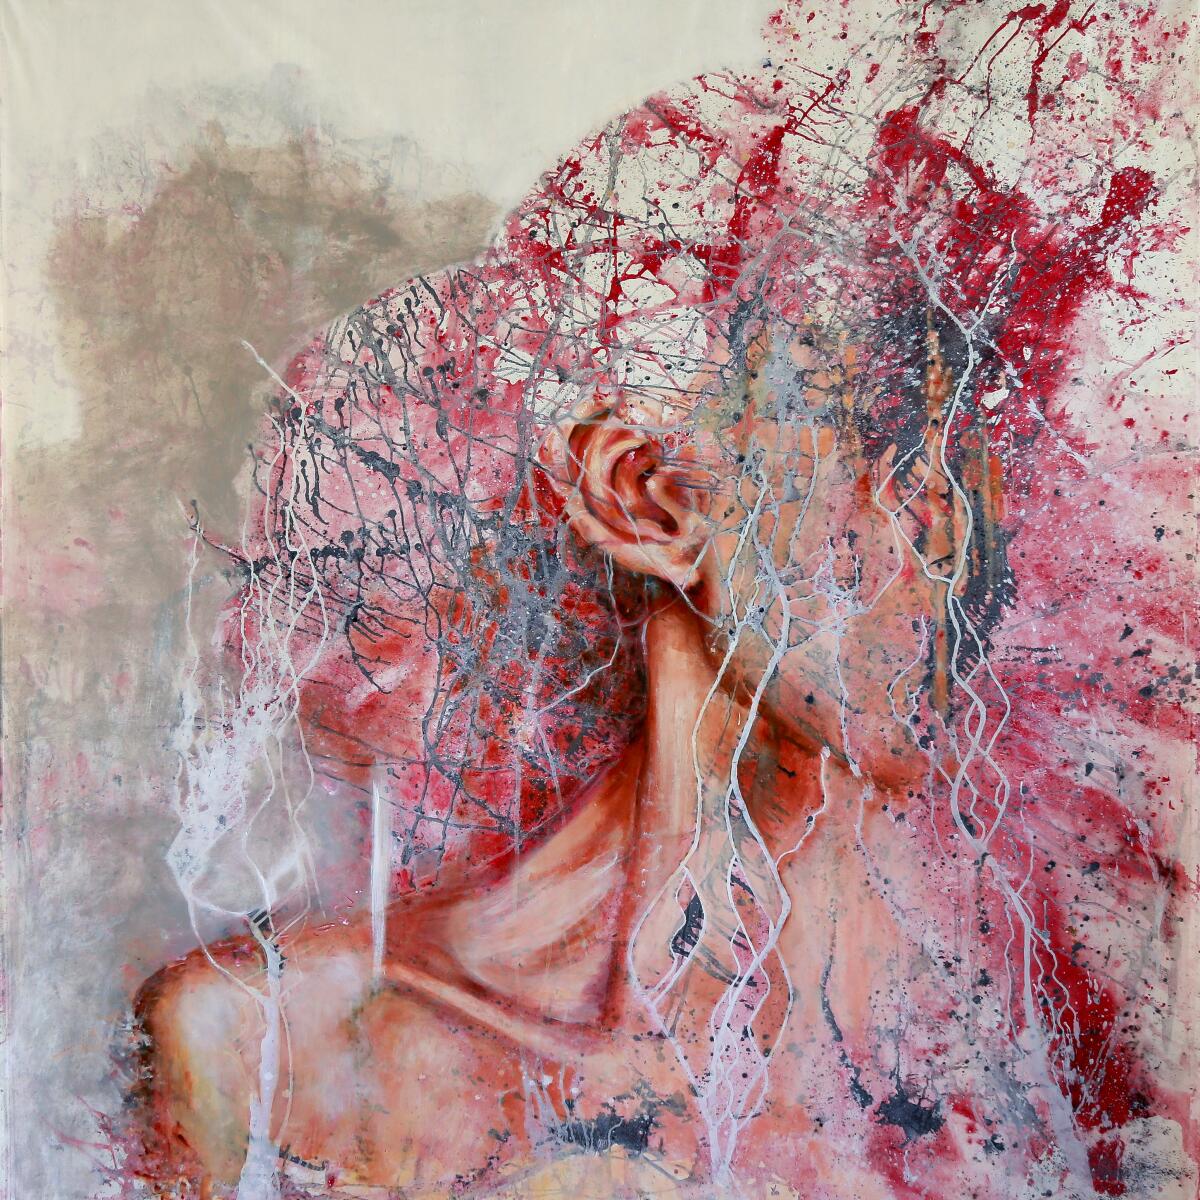 "Have No Shame," by Andrea Moni is featured in OCCCA's "Collaborate, Create and Heal" exhibit.